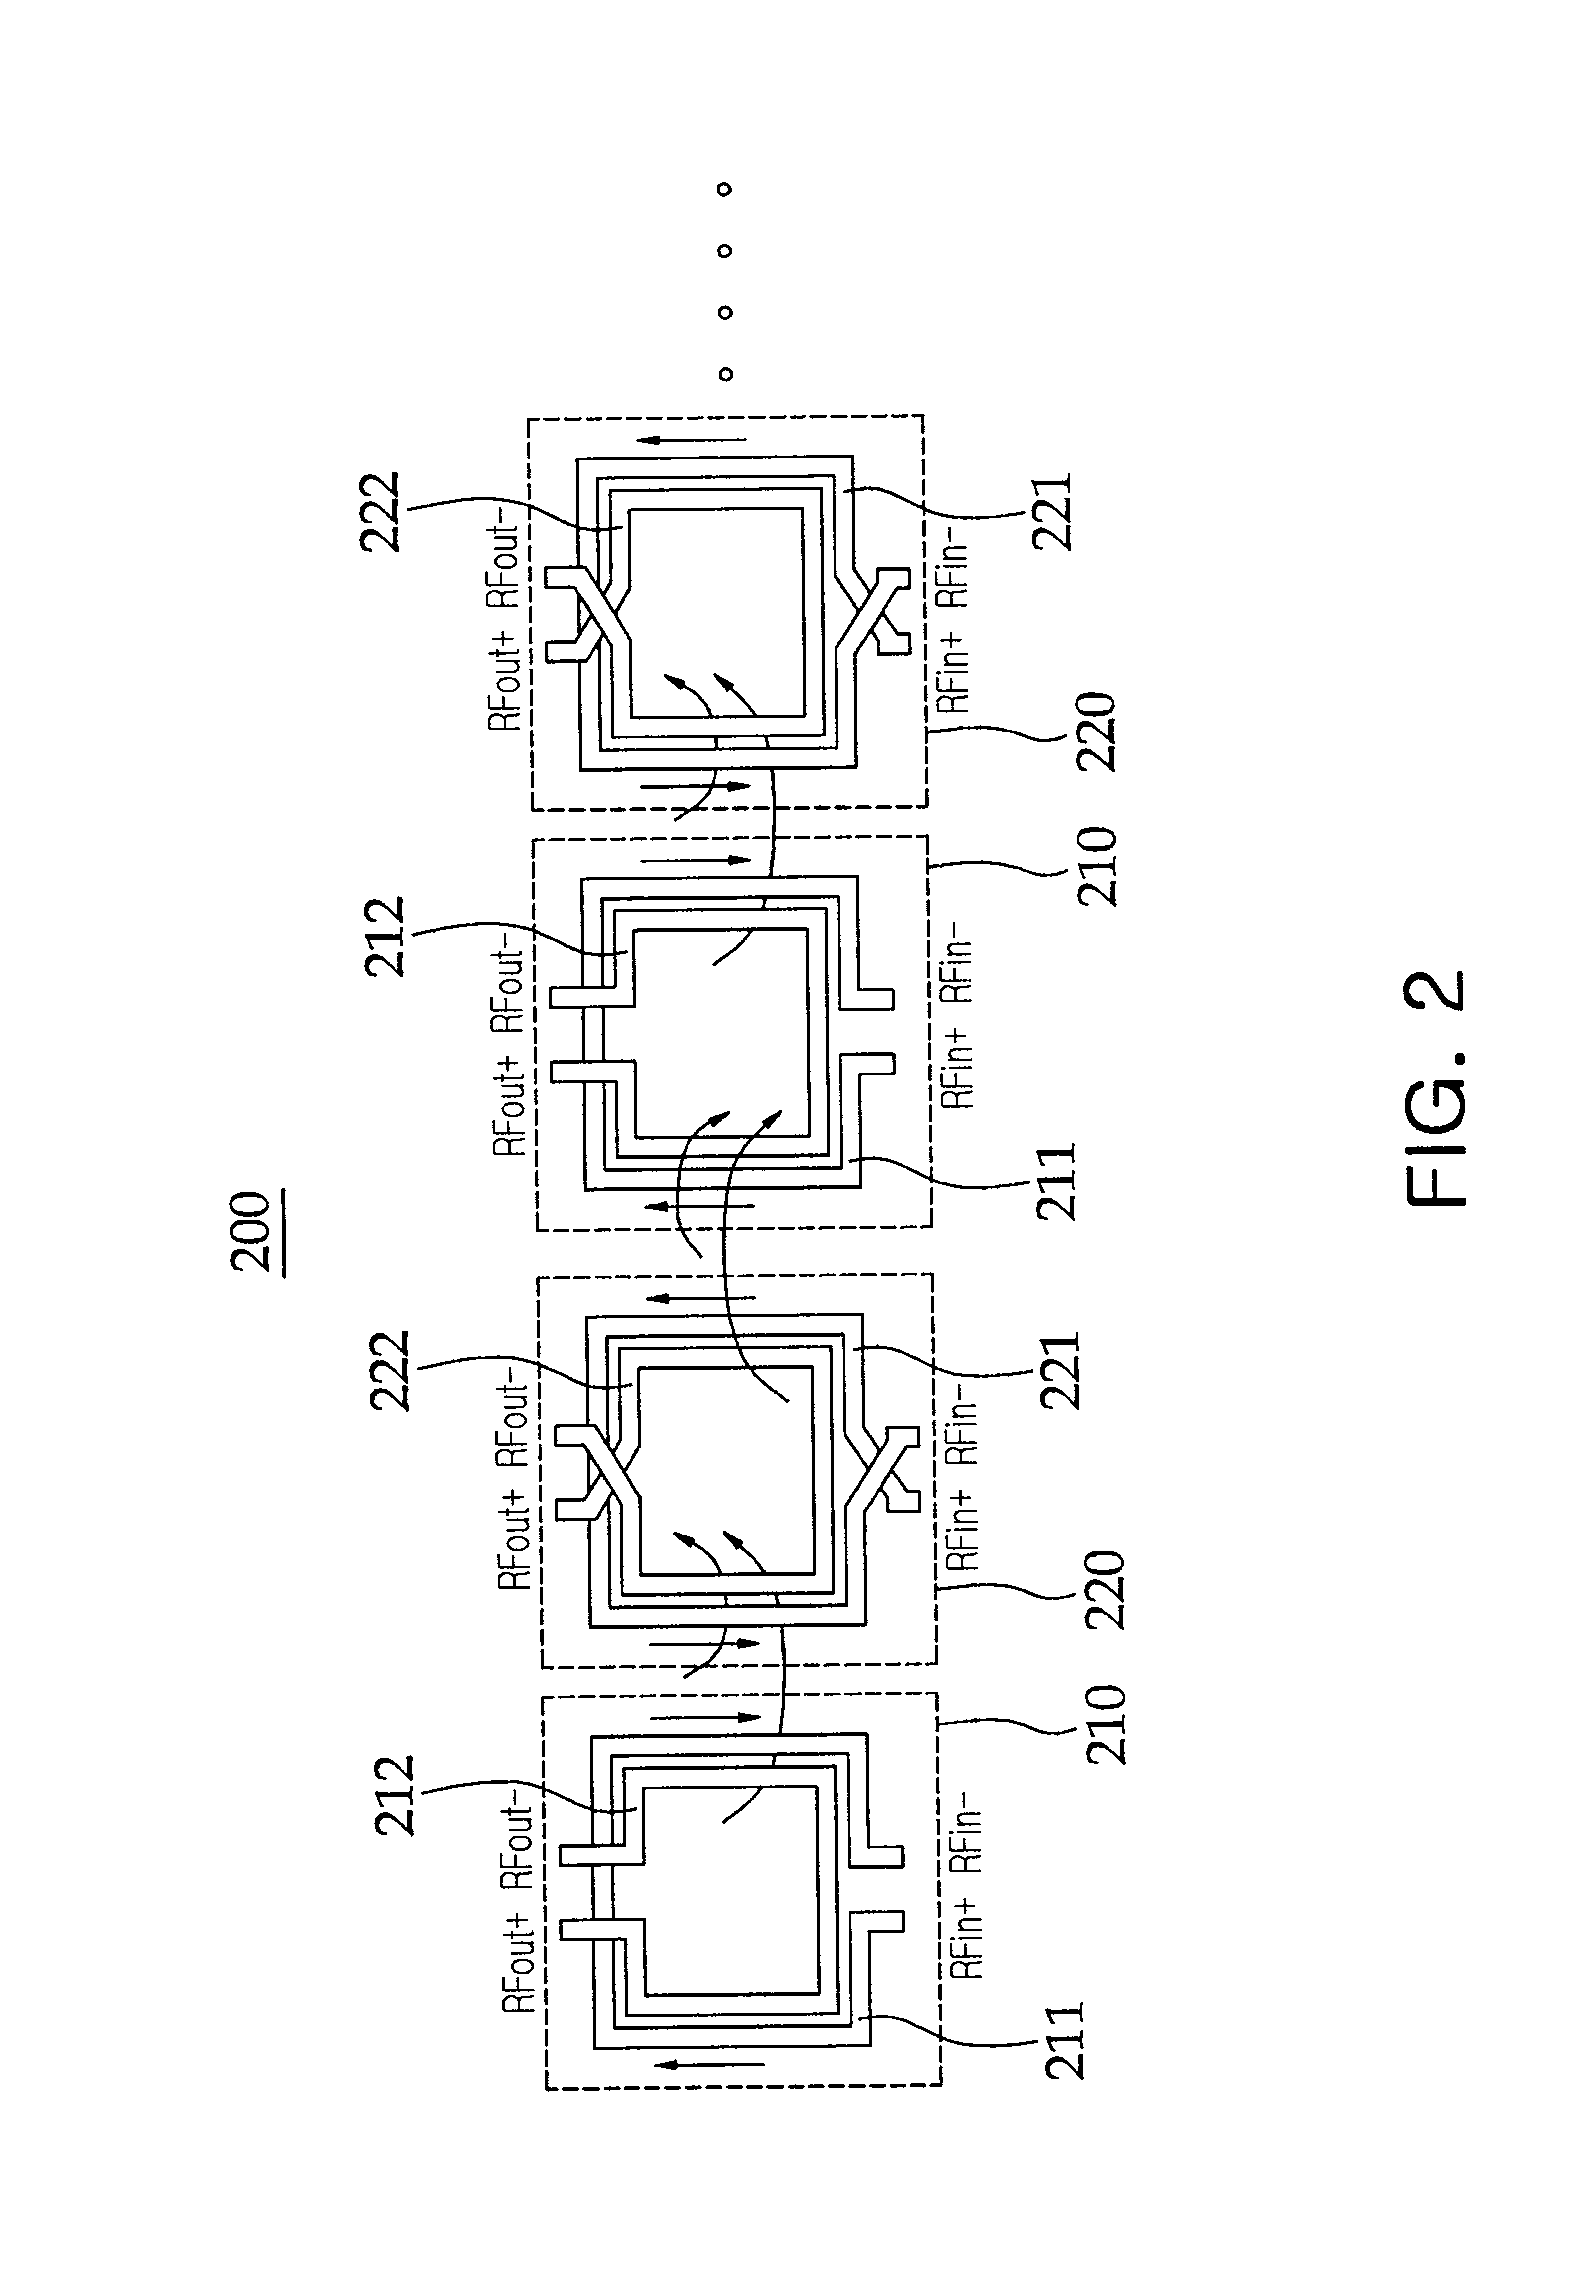 Impedance matching circuit eliminating interference between signal lines and power amplifier having the same